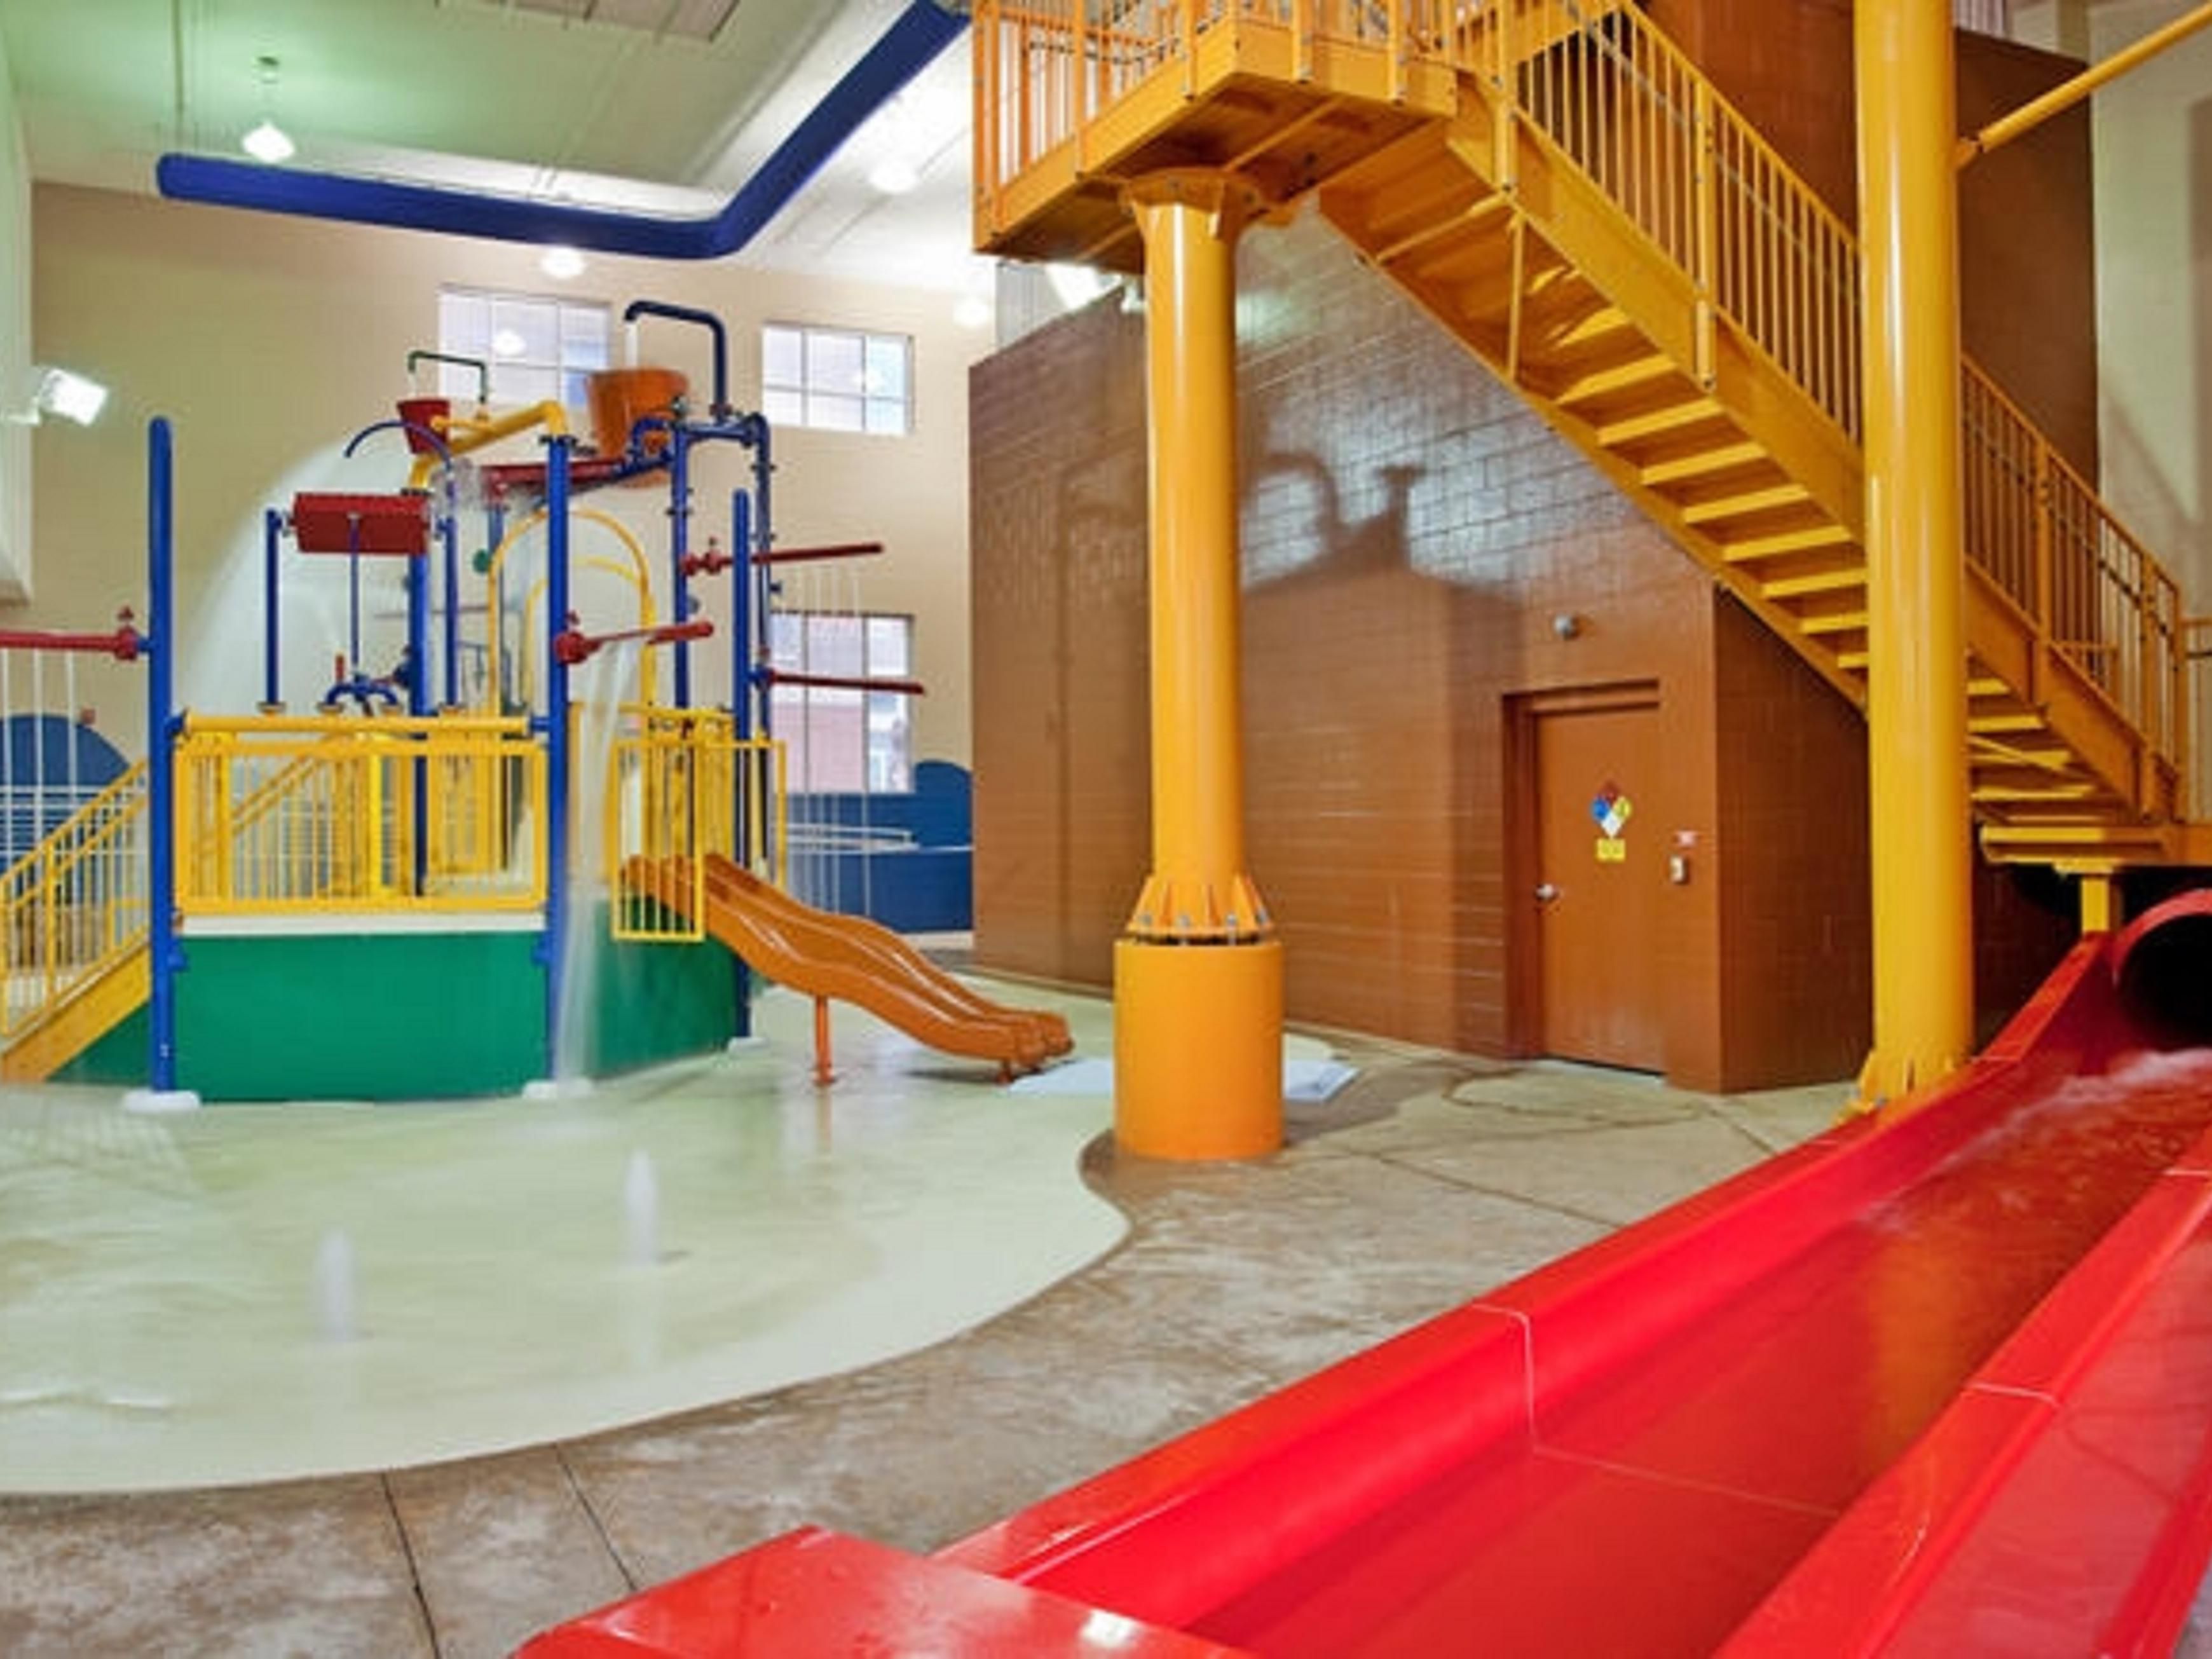 Make a splash at our indoor water park! Experience endless fun with our family-friendly splash pad, three story water slide, leisure pool, and hot tub! Please note, passes to the water park and indoor pool are an additional fee and not included in any reservation. Wristbands may be purchased at the front desk for $20 per pass, per day.